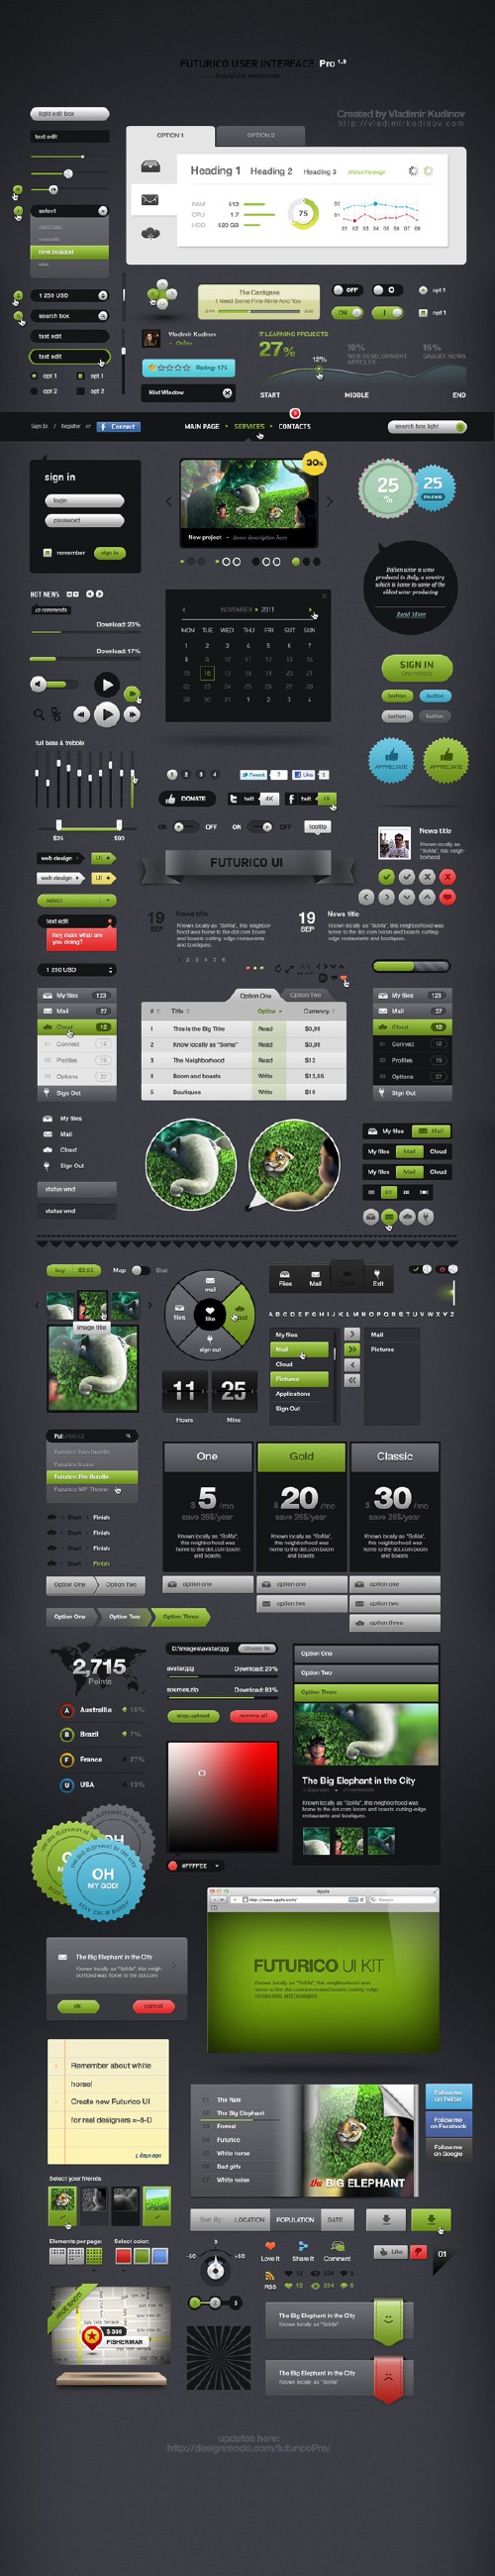 Futurico Pro User Interface Elements PSD pack (200 elements) 